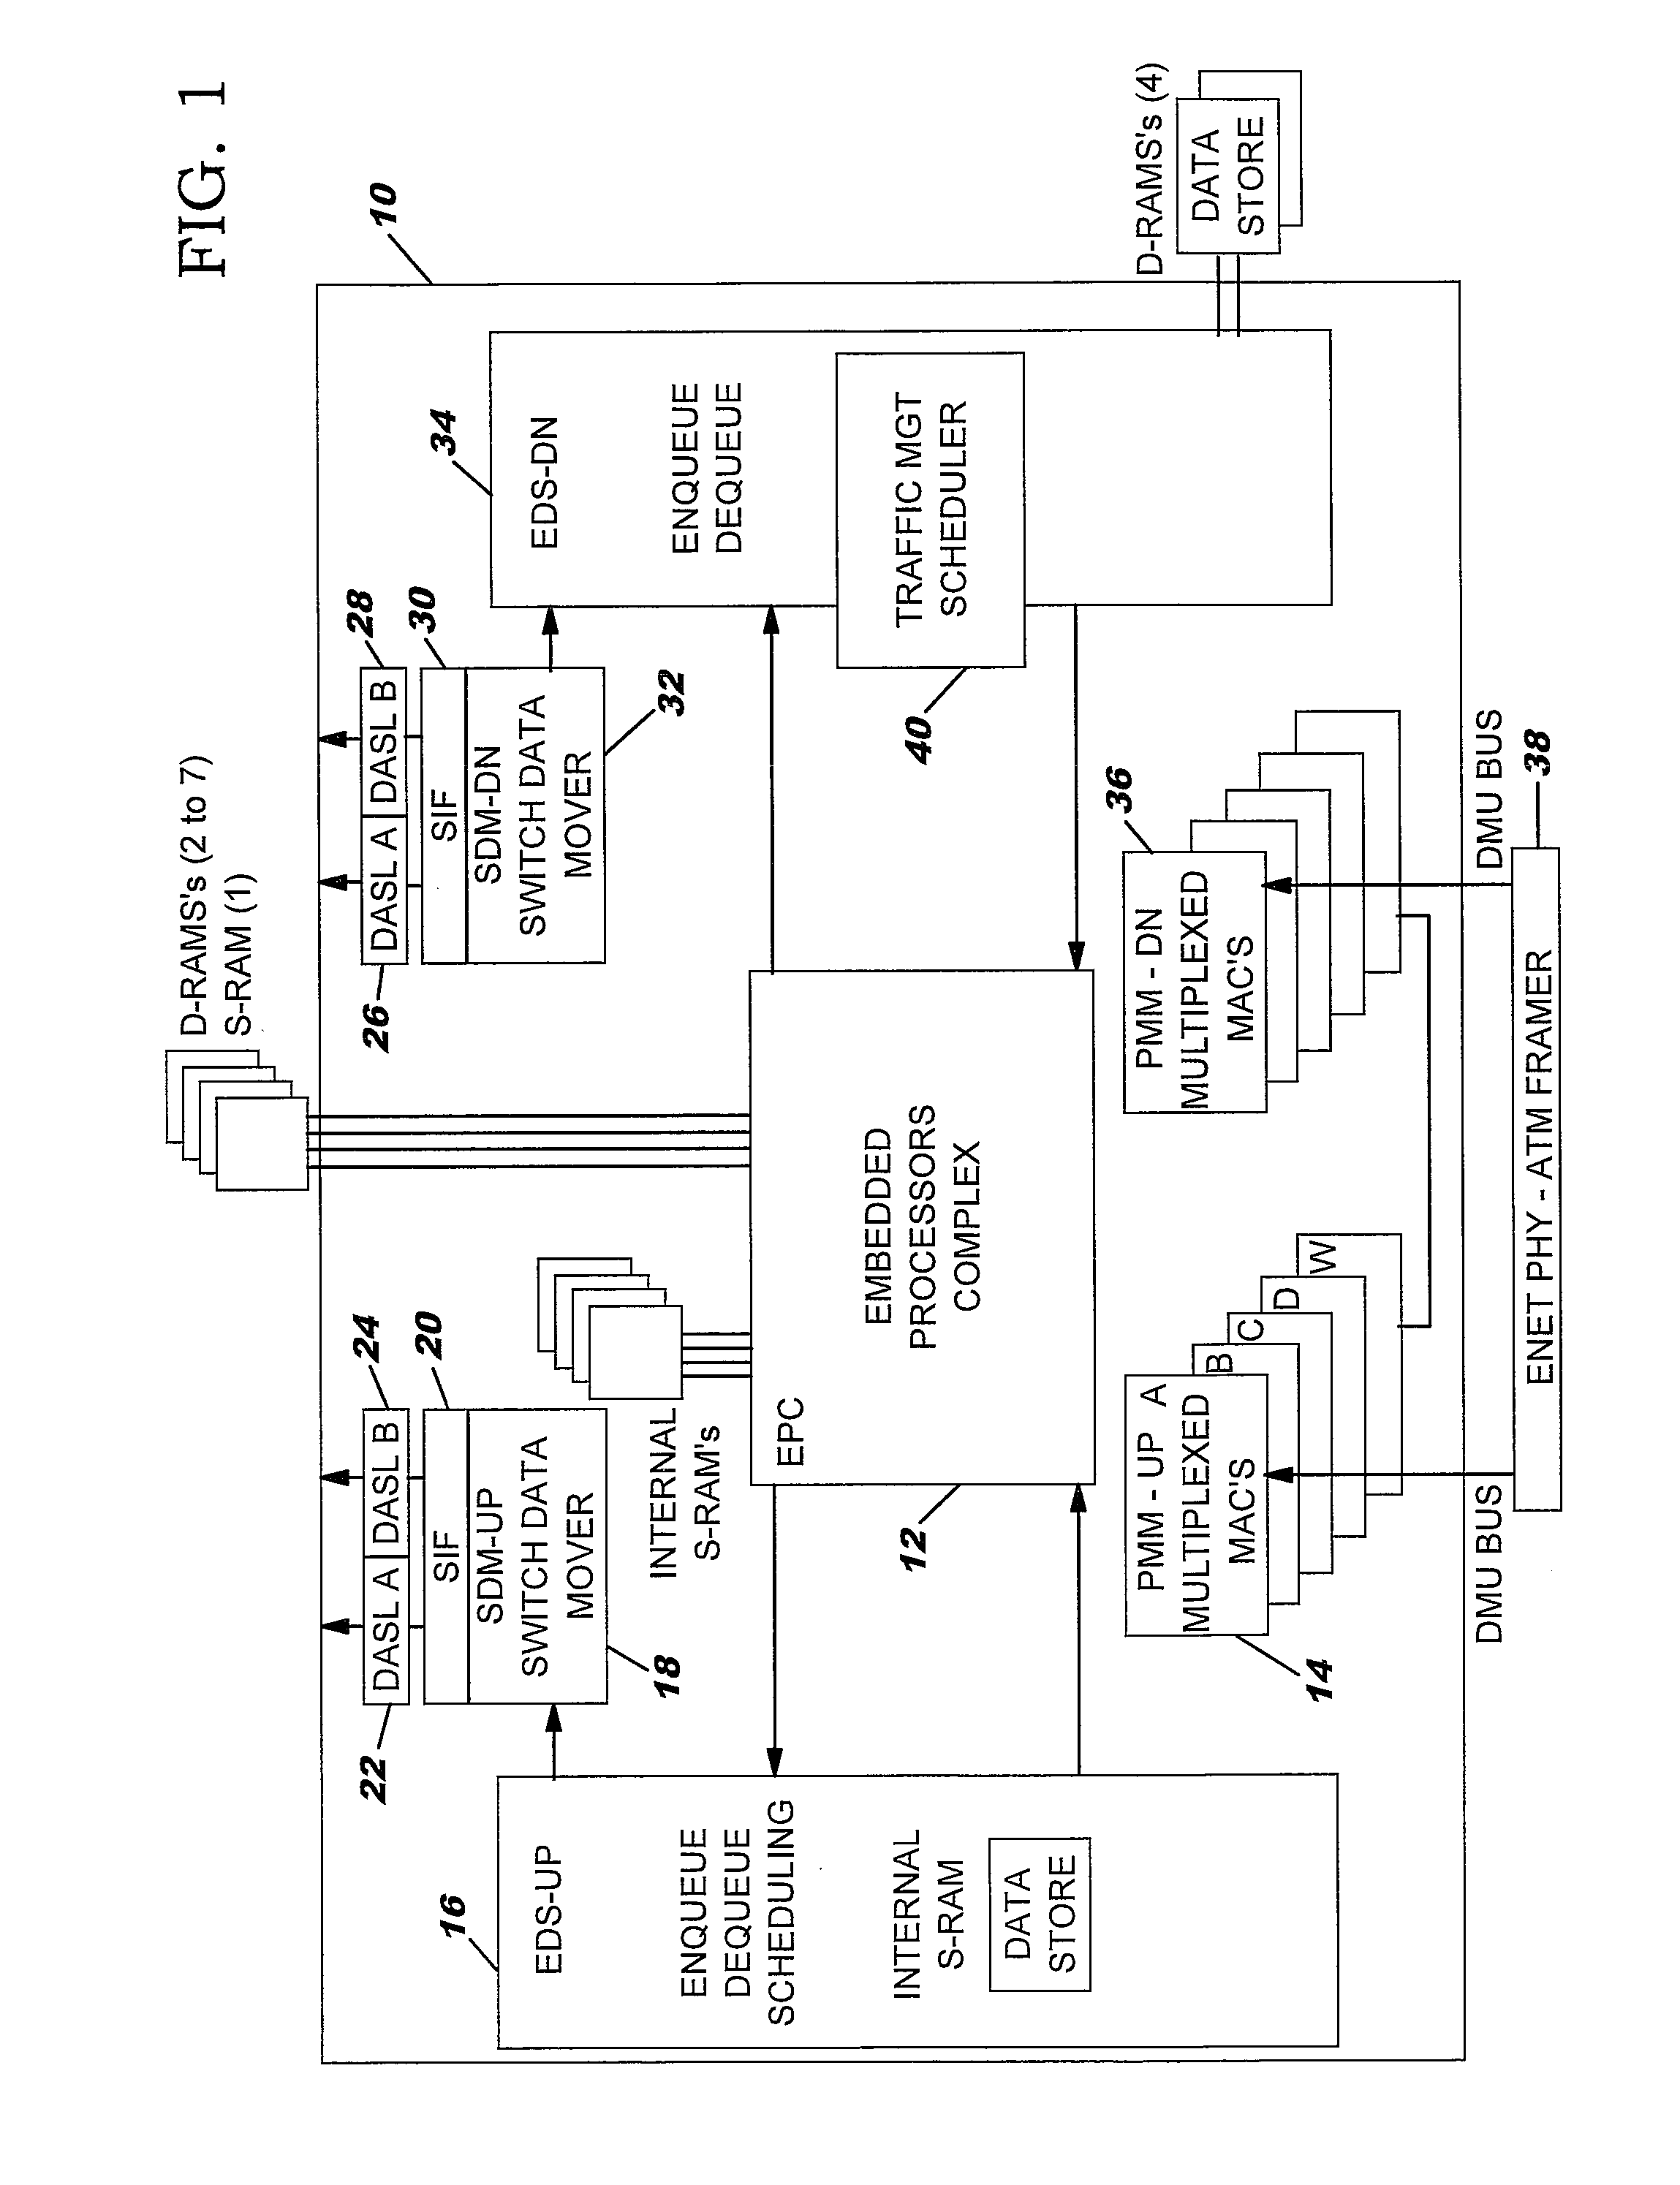 Method and system for network processor scheduling outputs using disconnect/reconnect flow queues